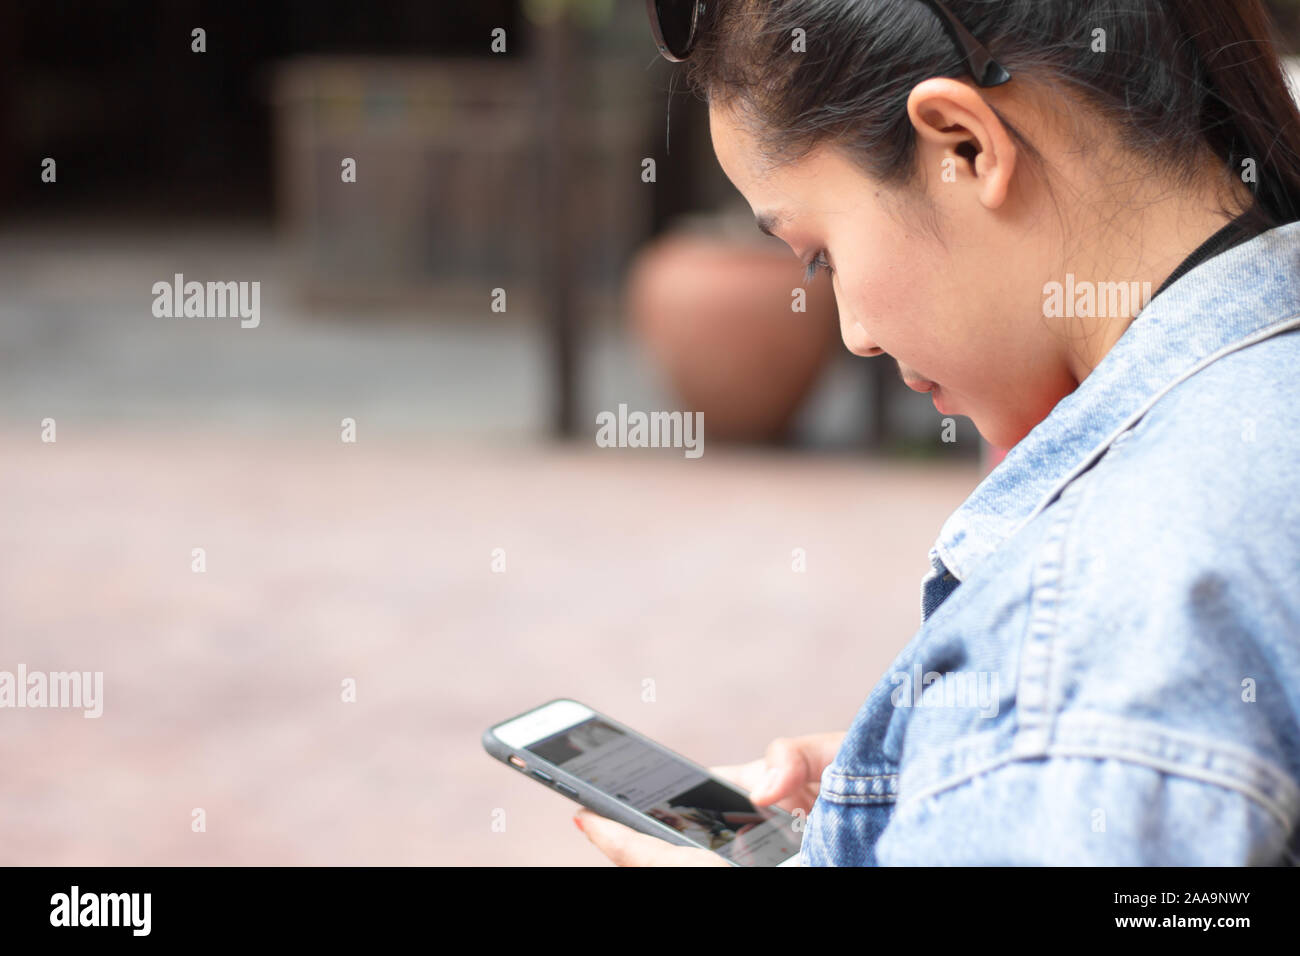 Behine teenage girl wearing a jacket, jeans and orange shirt and playing mobile phones. Stock Photo